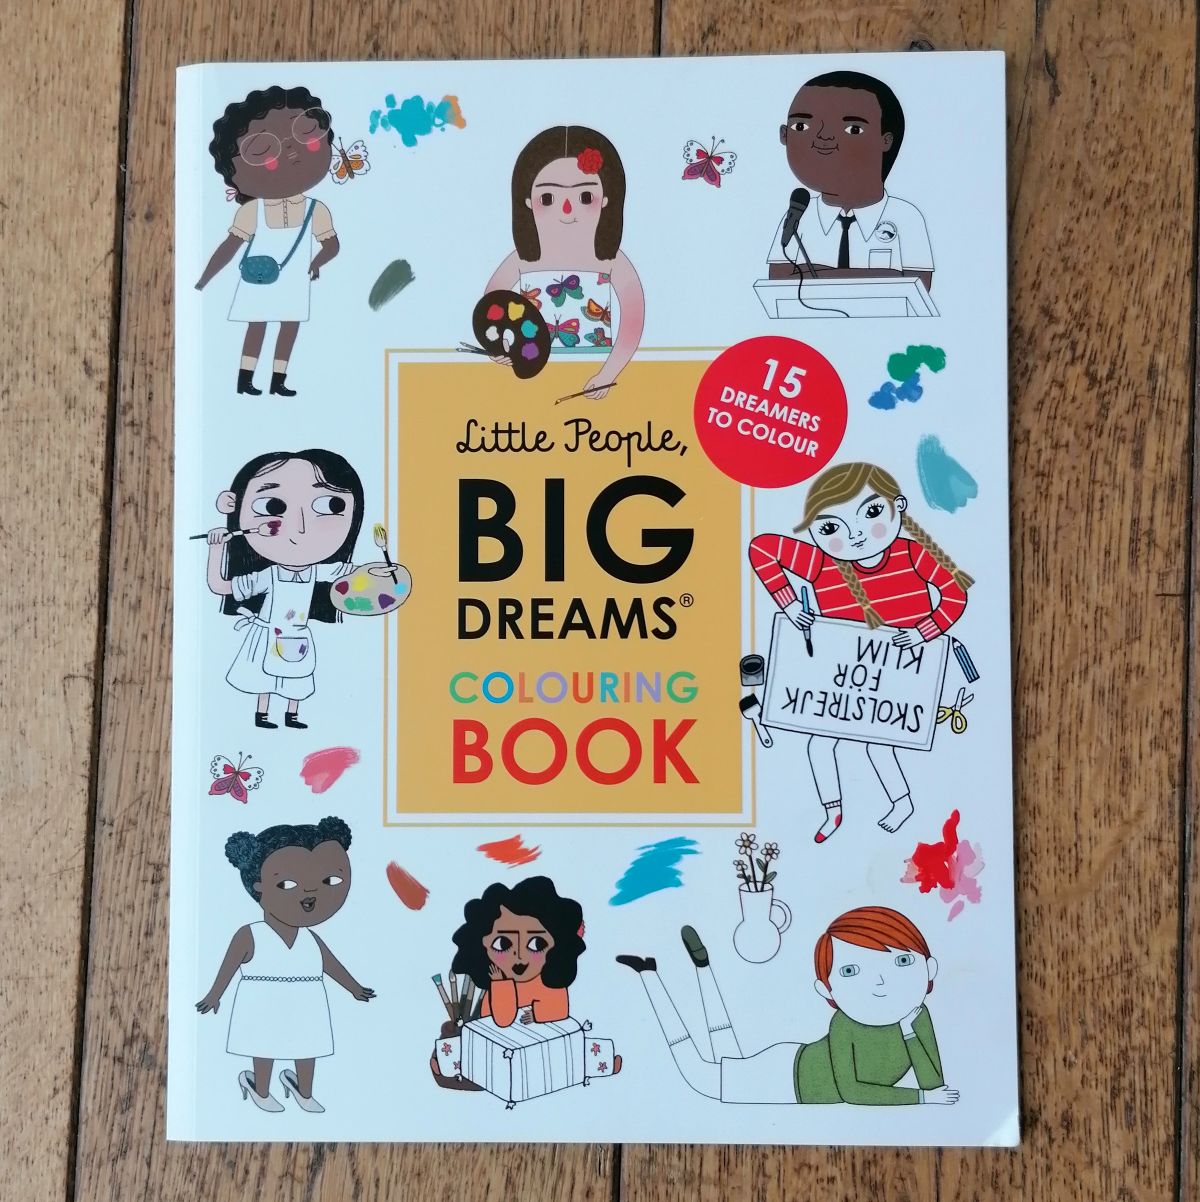 Little People, Big Dreams Colouring Book | Image courtesy of People's History Museum shop